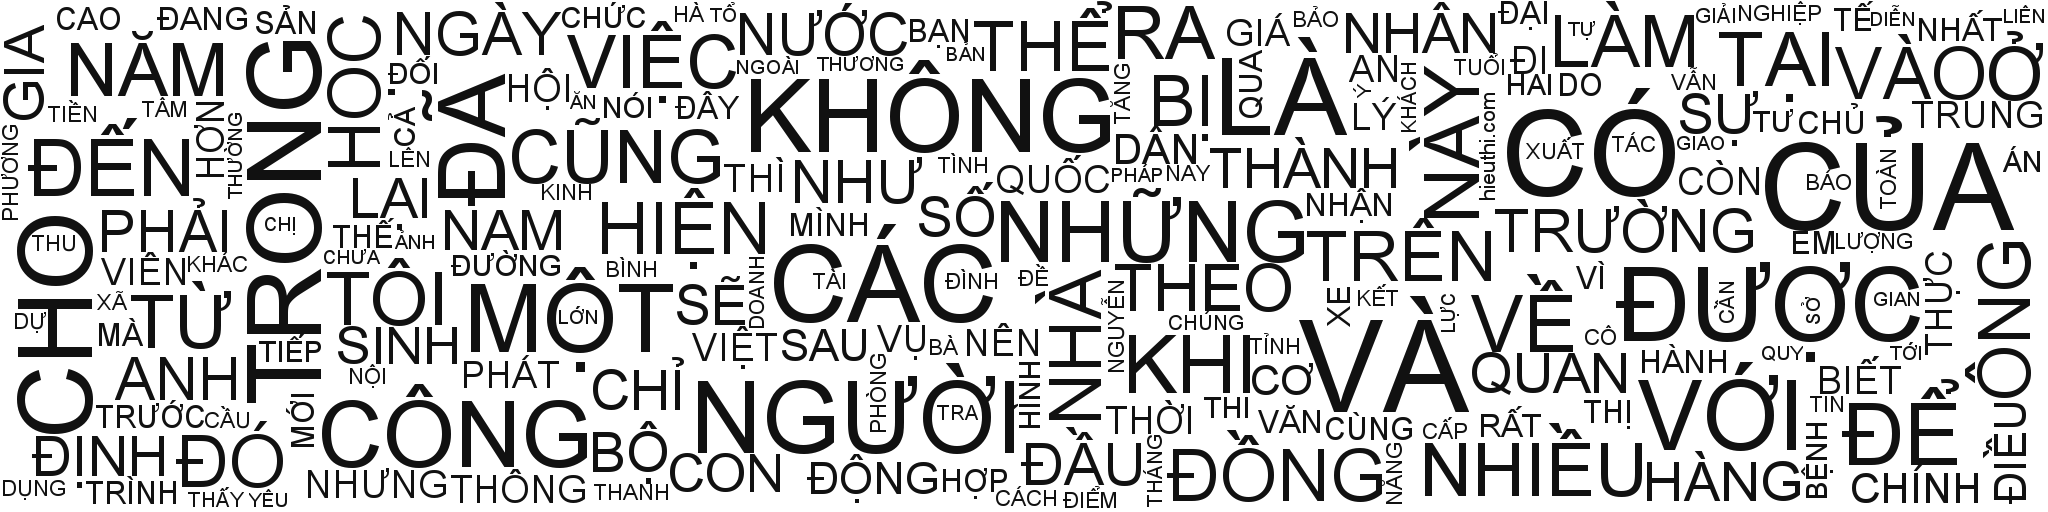 Wordcloud of most popular Vietnamese syllables